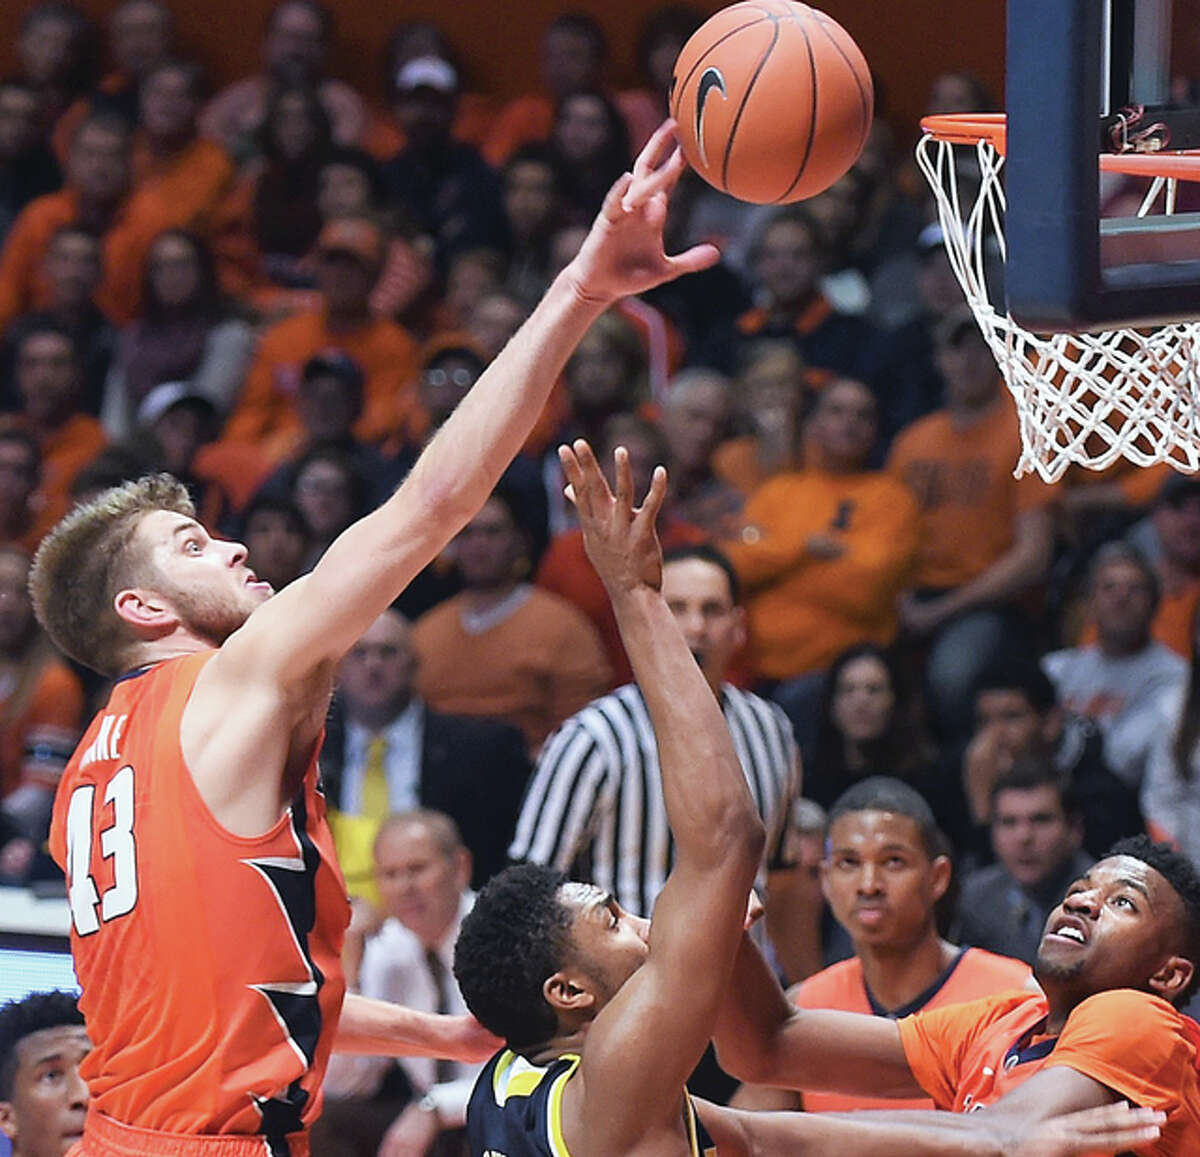 Illinois forward Michael Finke goes up and reaches for the ball in last week’s home loss to Michigan at State Farm Center.